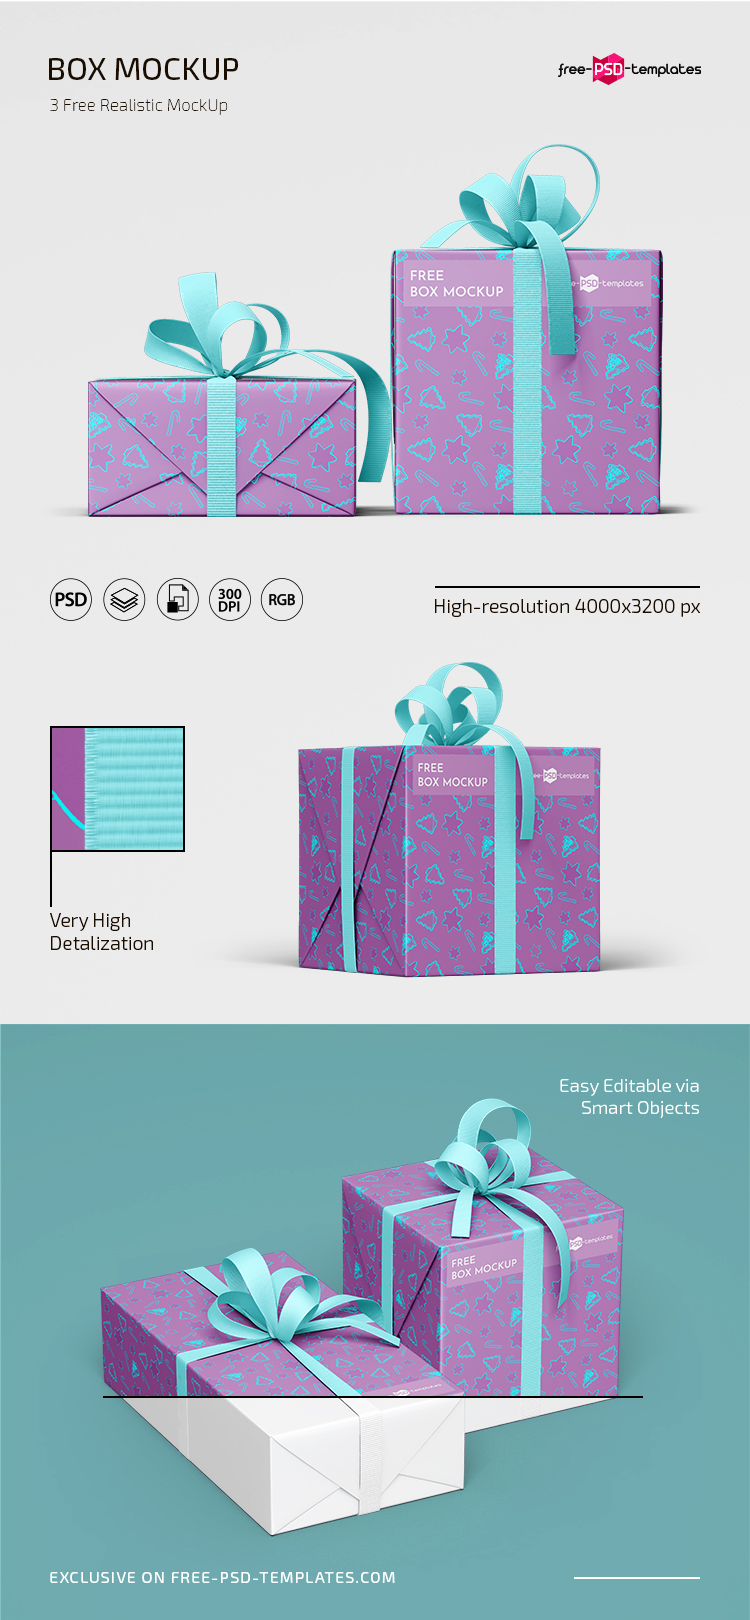 Download Free Box Mockup Template in PSD | Free PSD Templates